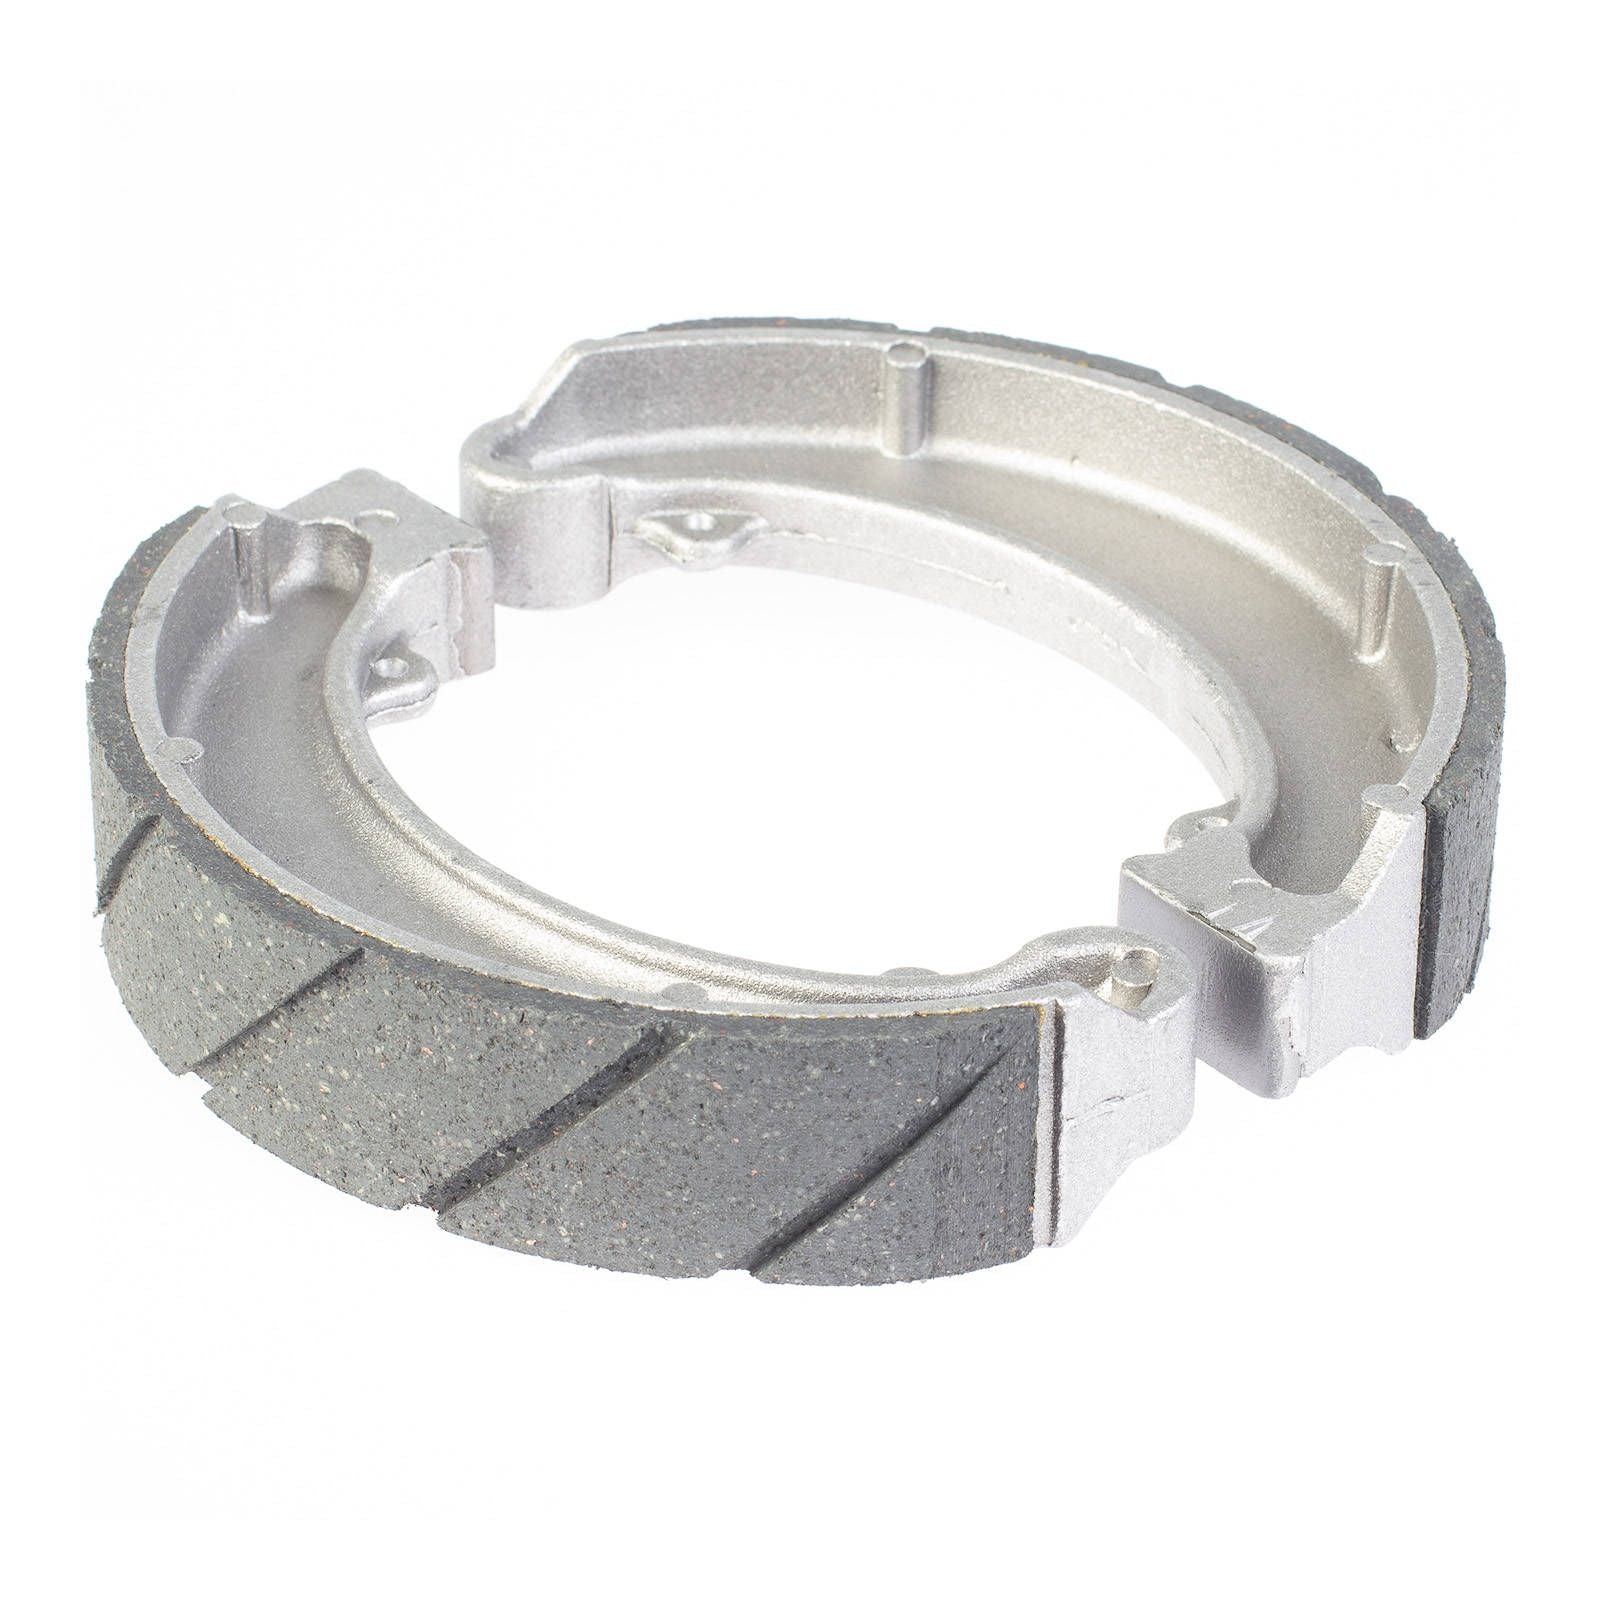 New WHITES Motorcycle Brake Shoes - Water Groove #WPBS39163